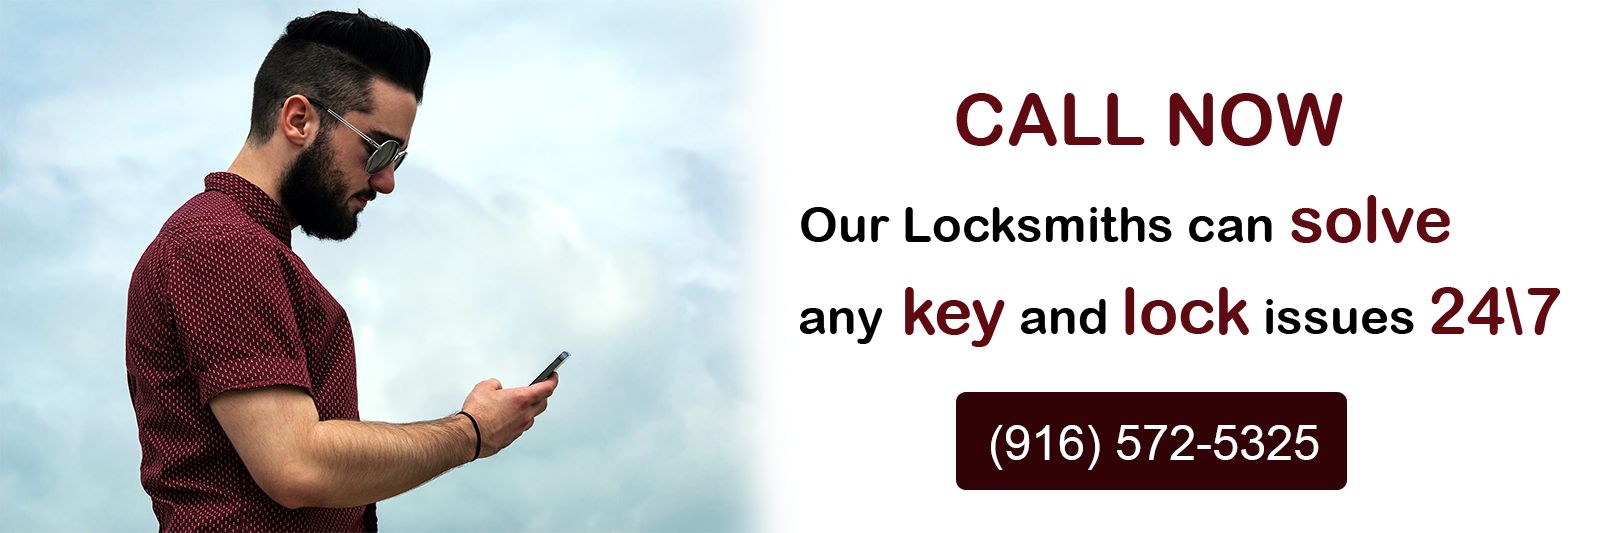 Call To The Best 24 Hour Locksmith In Natomas